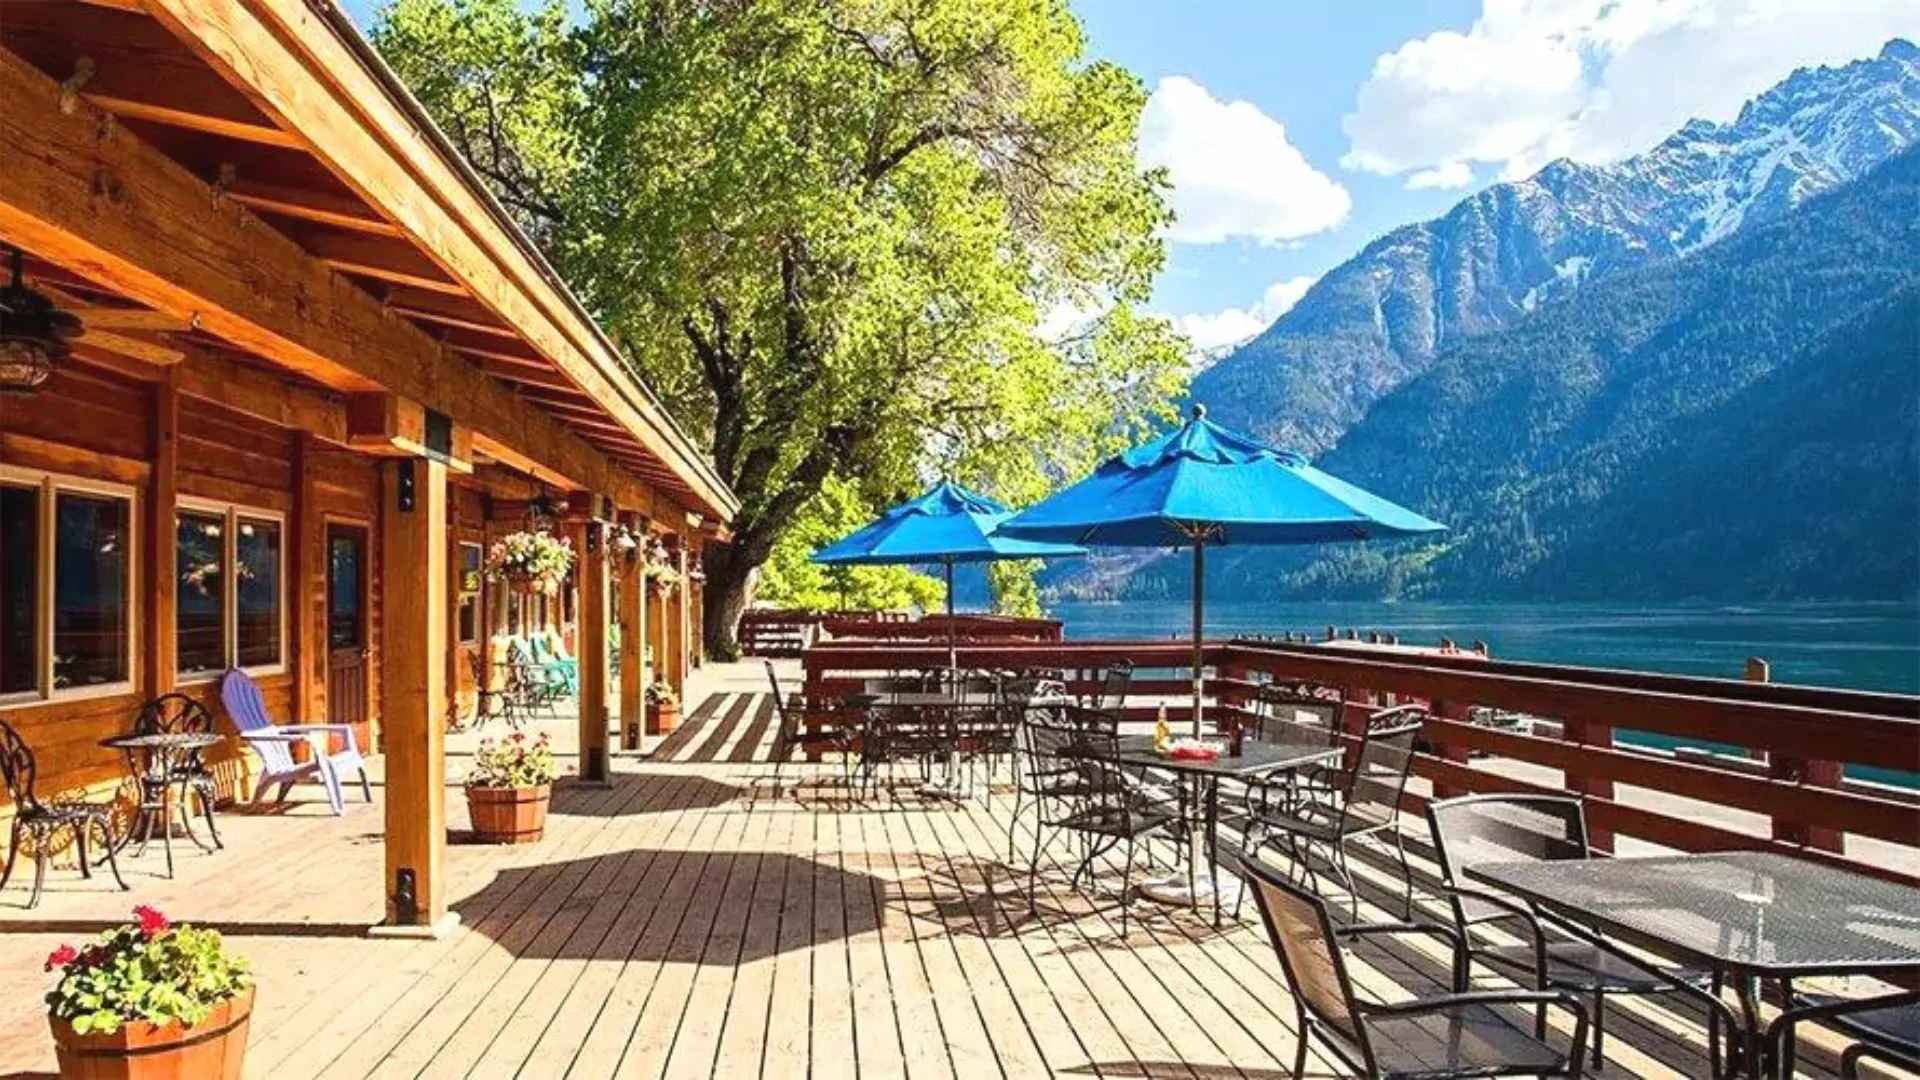 Sunny tables and chairs sit on rustic wooden plank patio beside a mountain lake